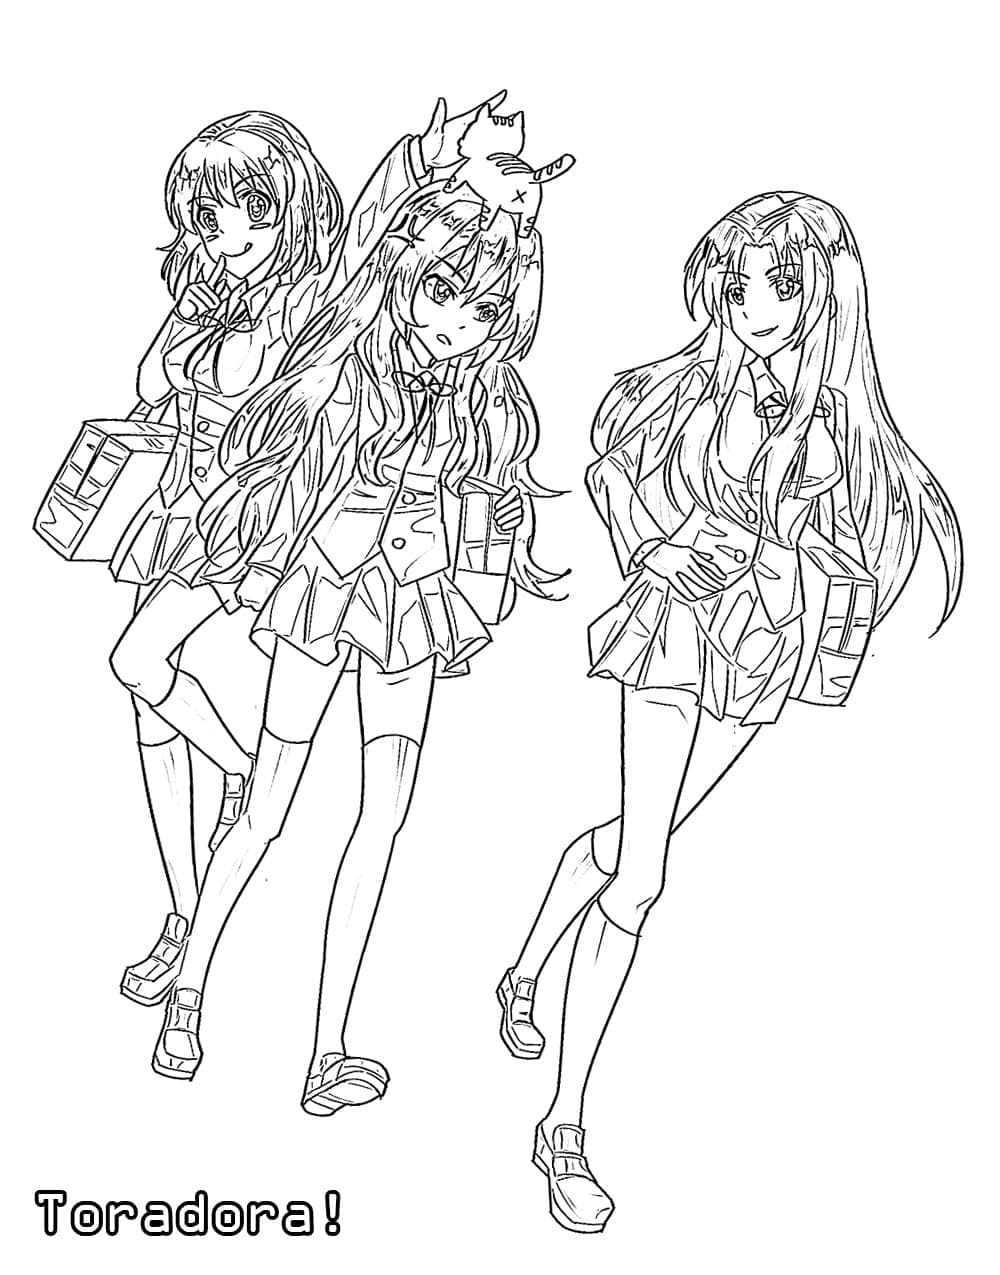 Anime Girls from Toradora Coloring Page - Anime Coloring Pages